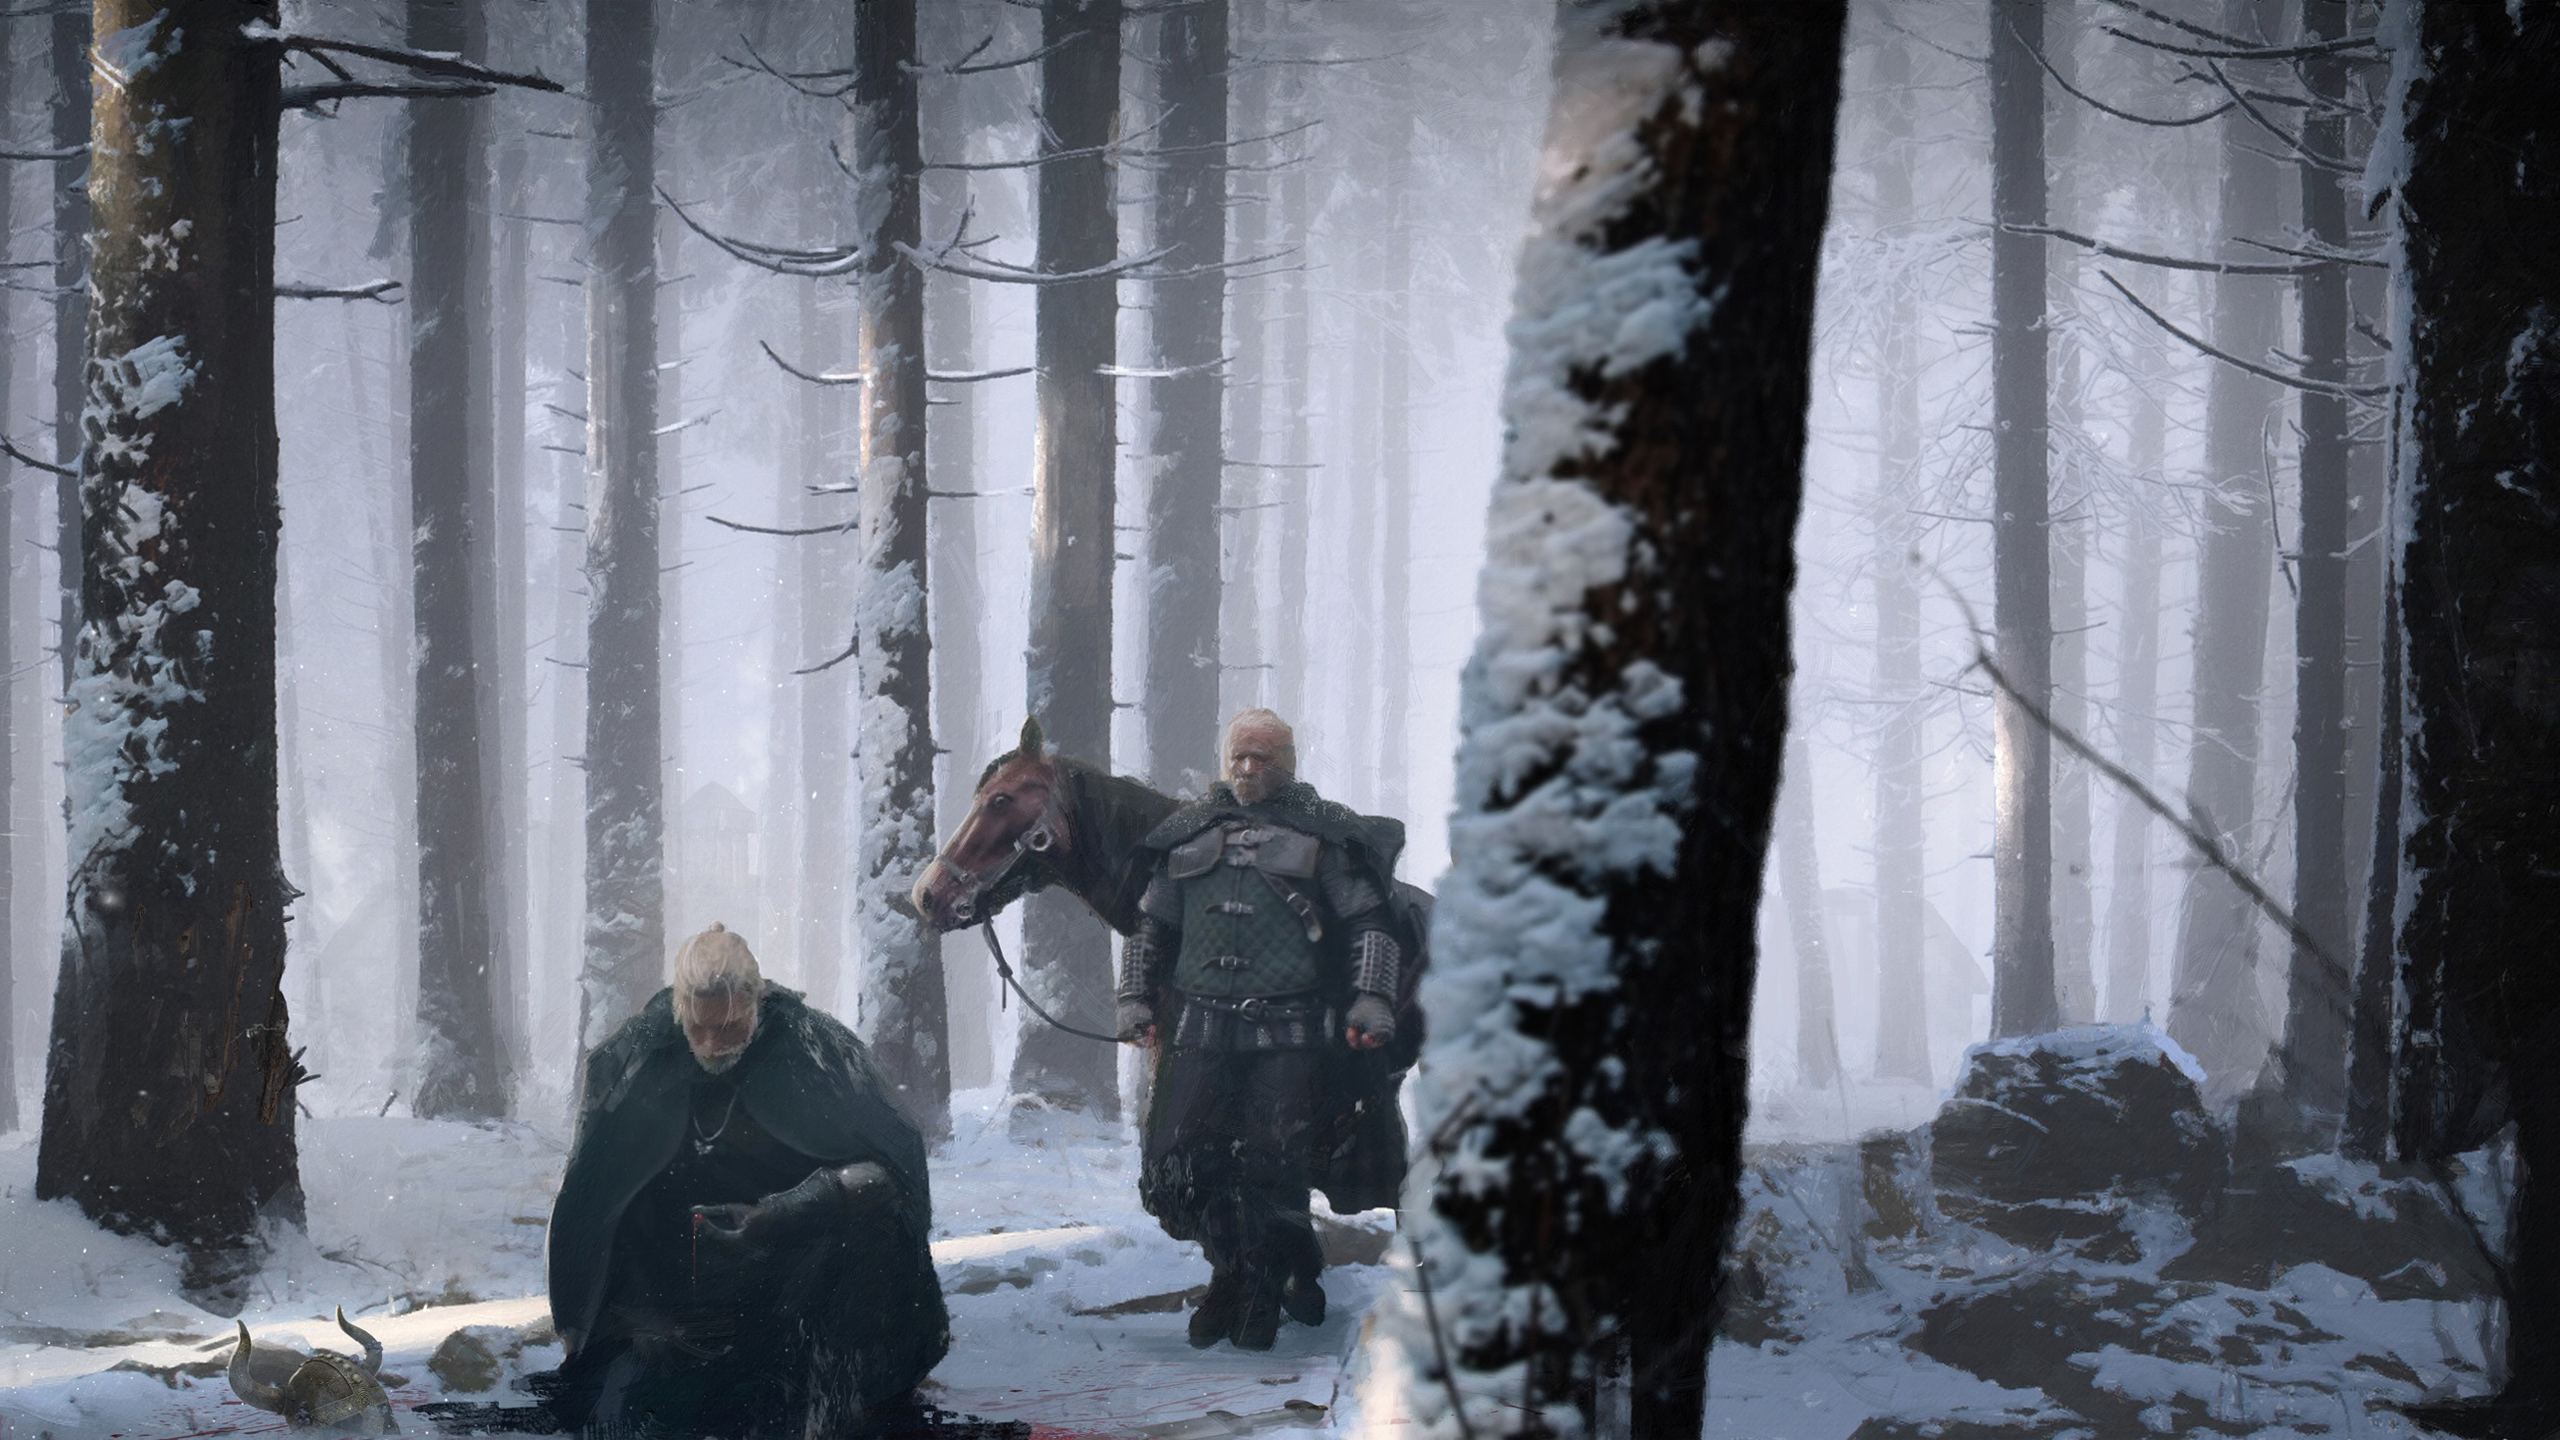 Wallpaper, forest, snow, ice, The Witcher, The Witcher 3 Wild Hunt, Geralt of Rivia, Freezing, weather, season, blizzard, winter storm 2560x1440